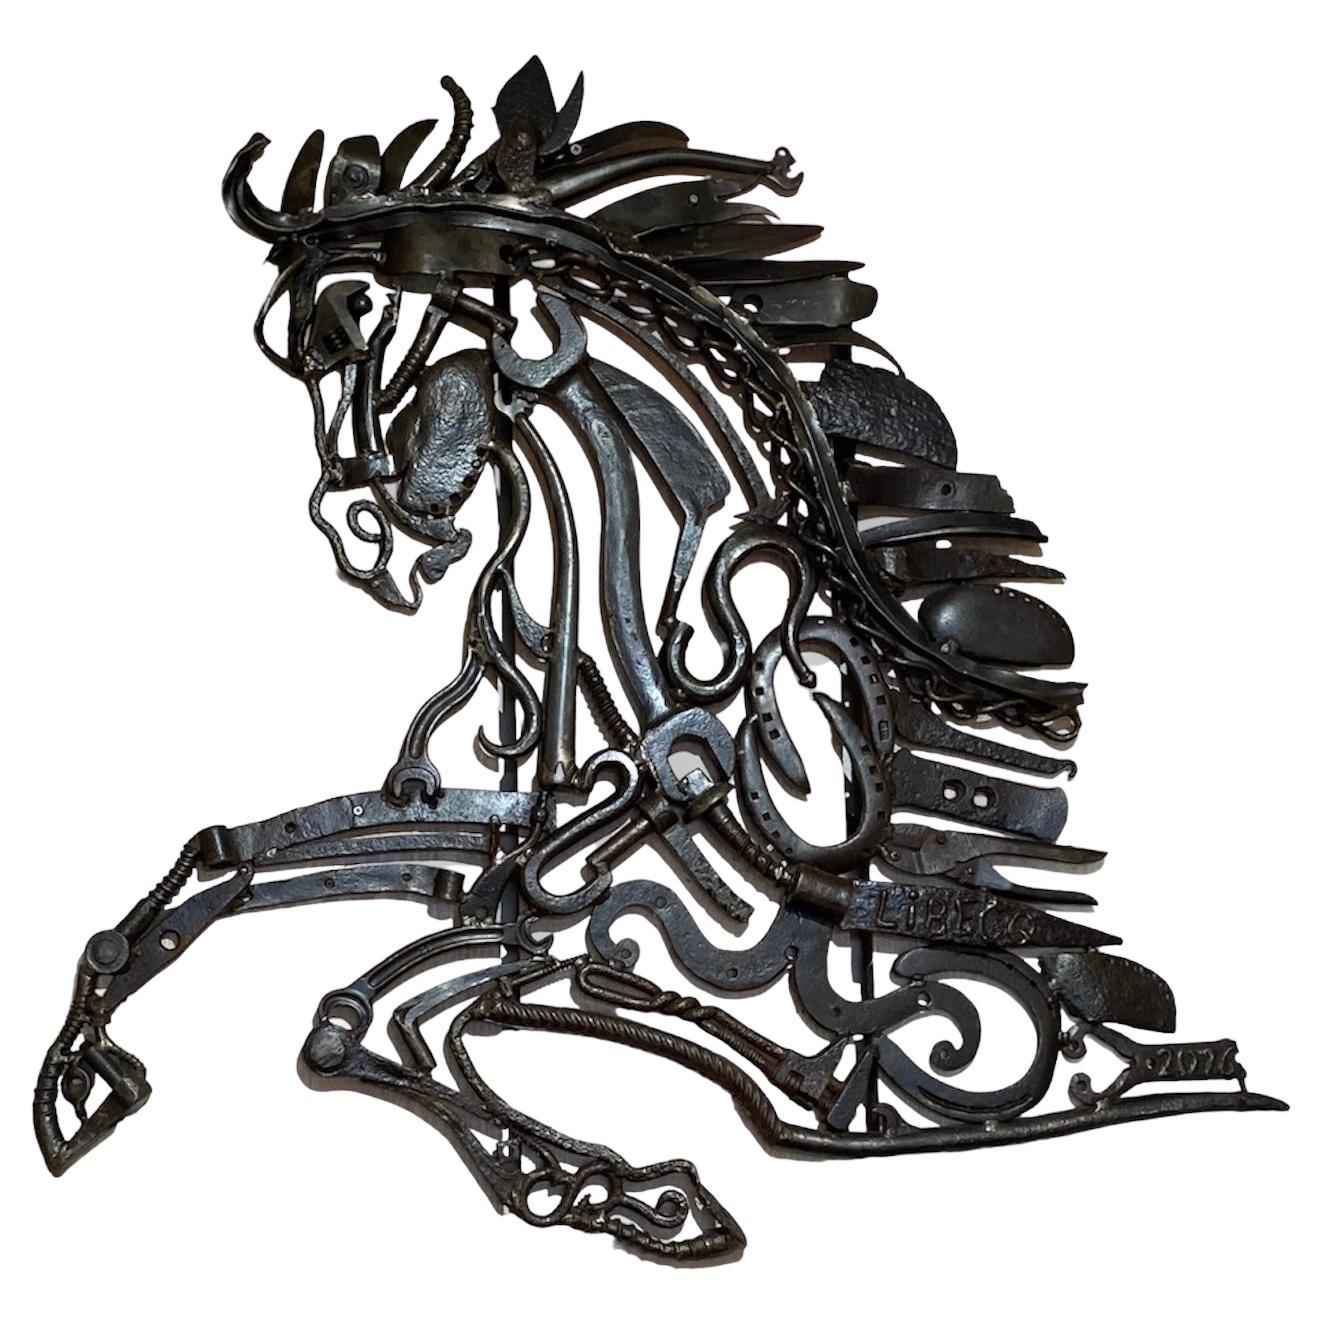 Recup Art by Libecq Recovered Metal Horse, 2016 For Sale